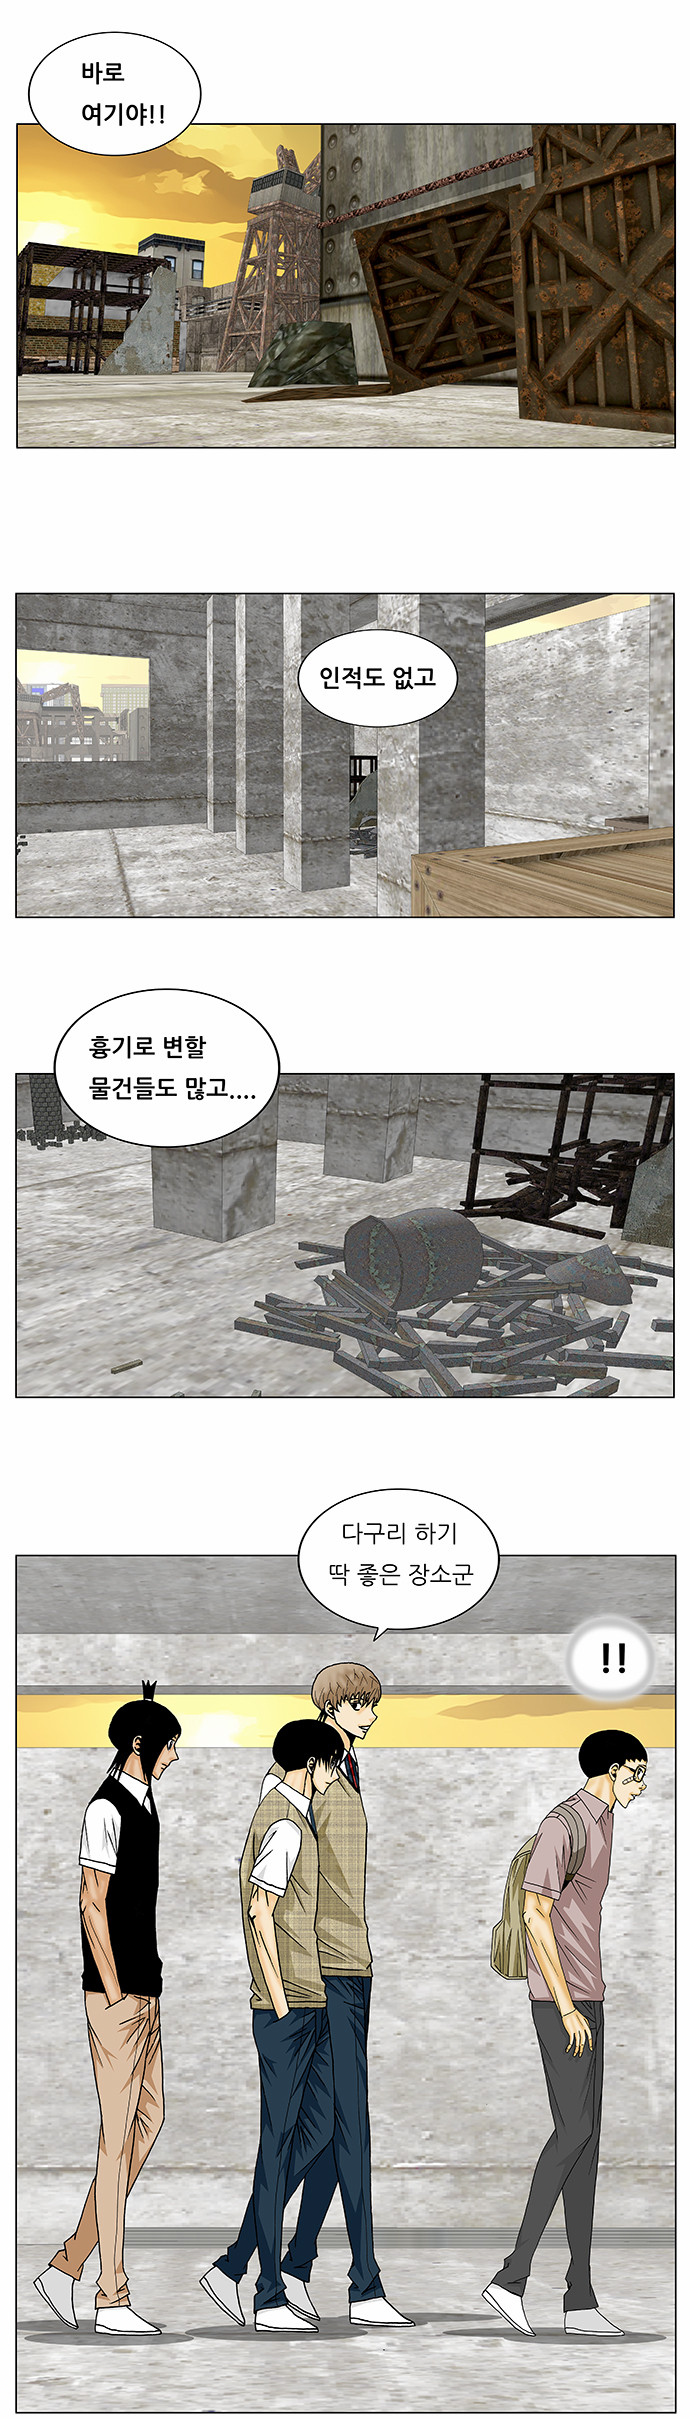 Ultimate Legend - Kang Hae Hyo - Chapter 141 - Page 4